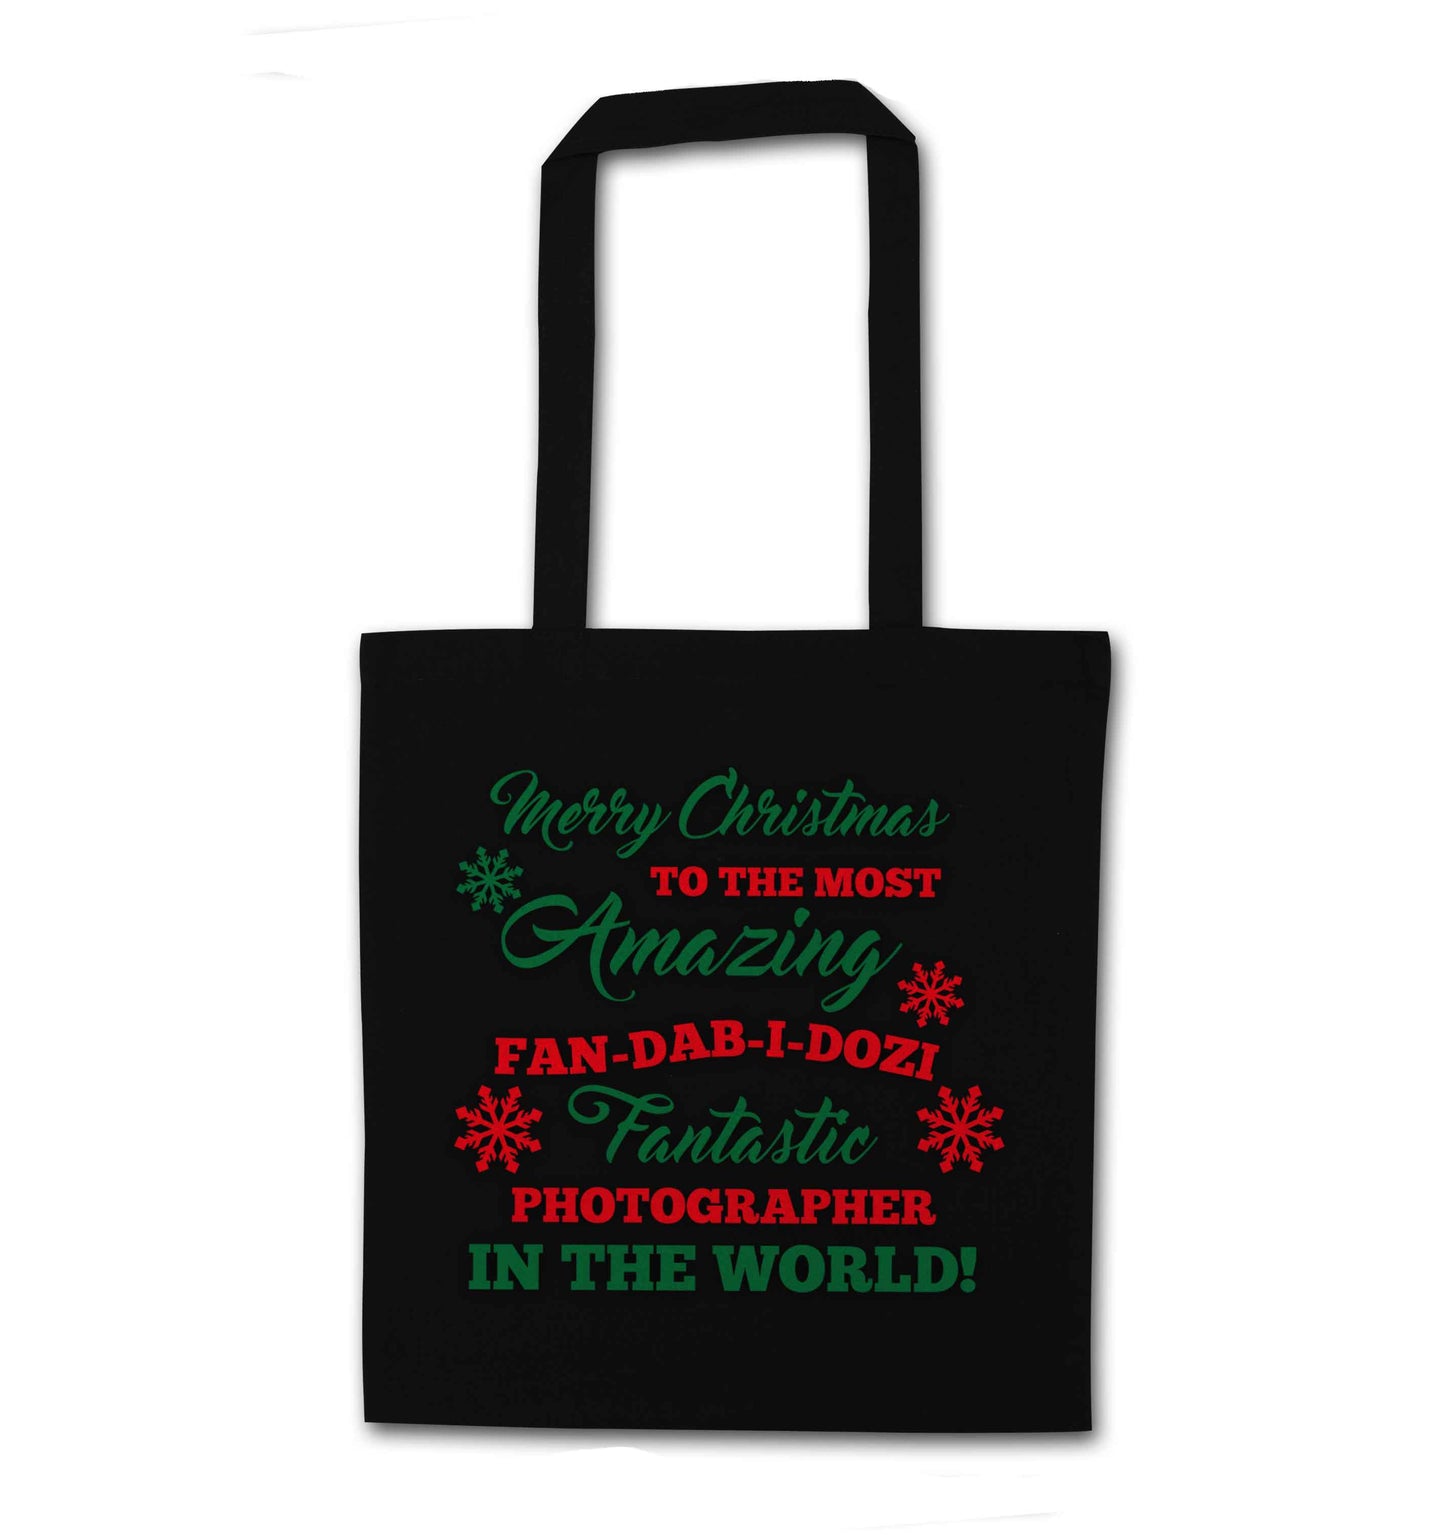 Merry Christmas to the most amazing fan-dab-i-dozi fantasic photographer in the world black tote bag